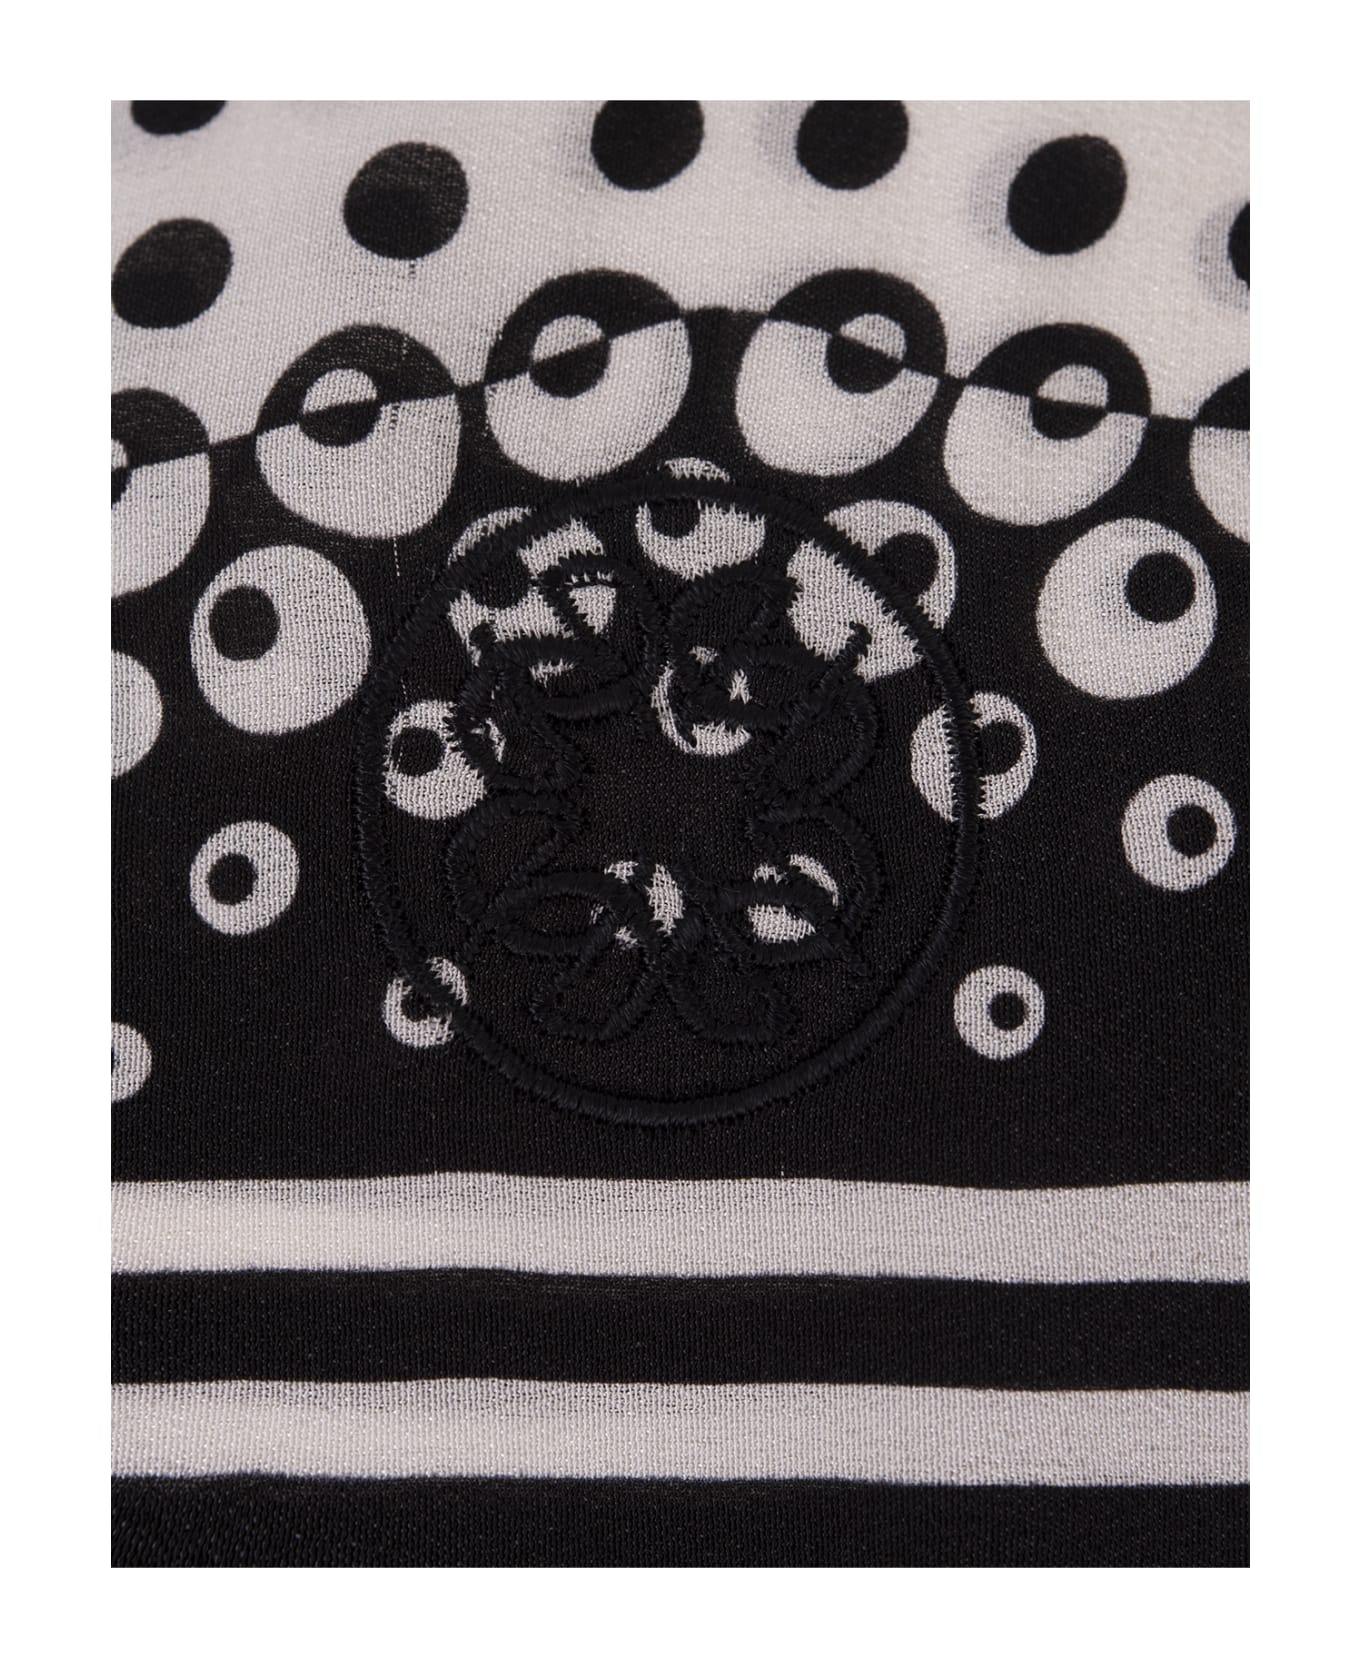 Elie Saab Moon Printed Silk Shirt In White And Black - White ブラウス